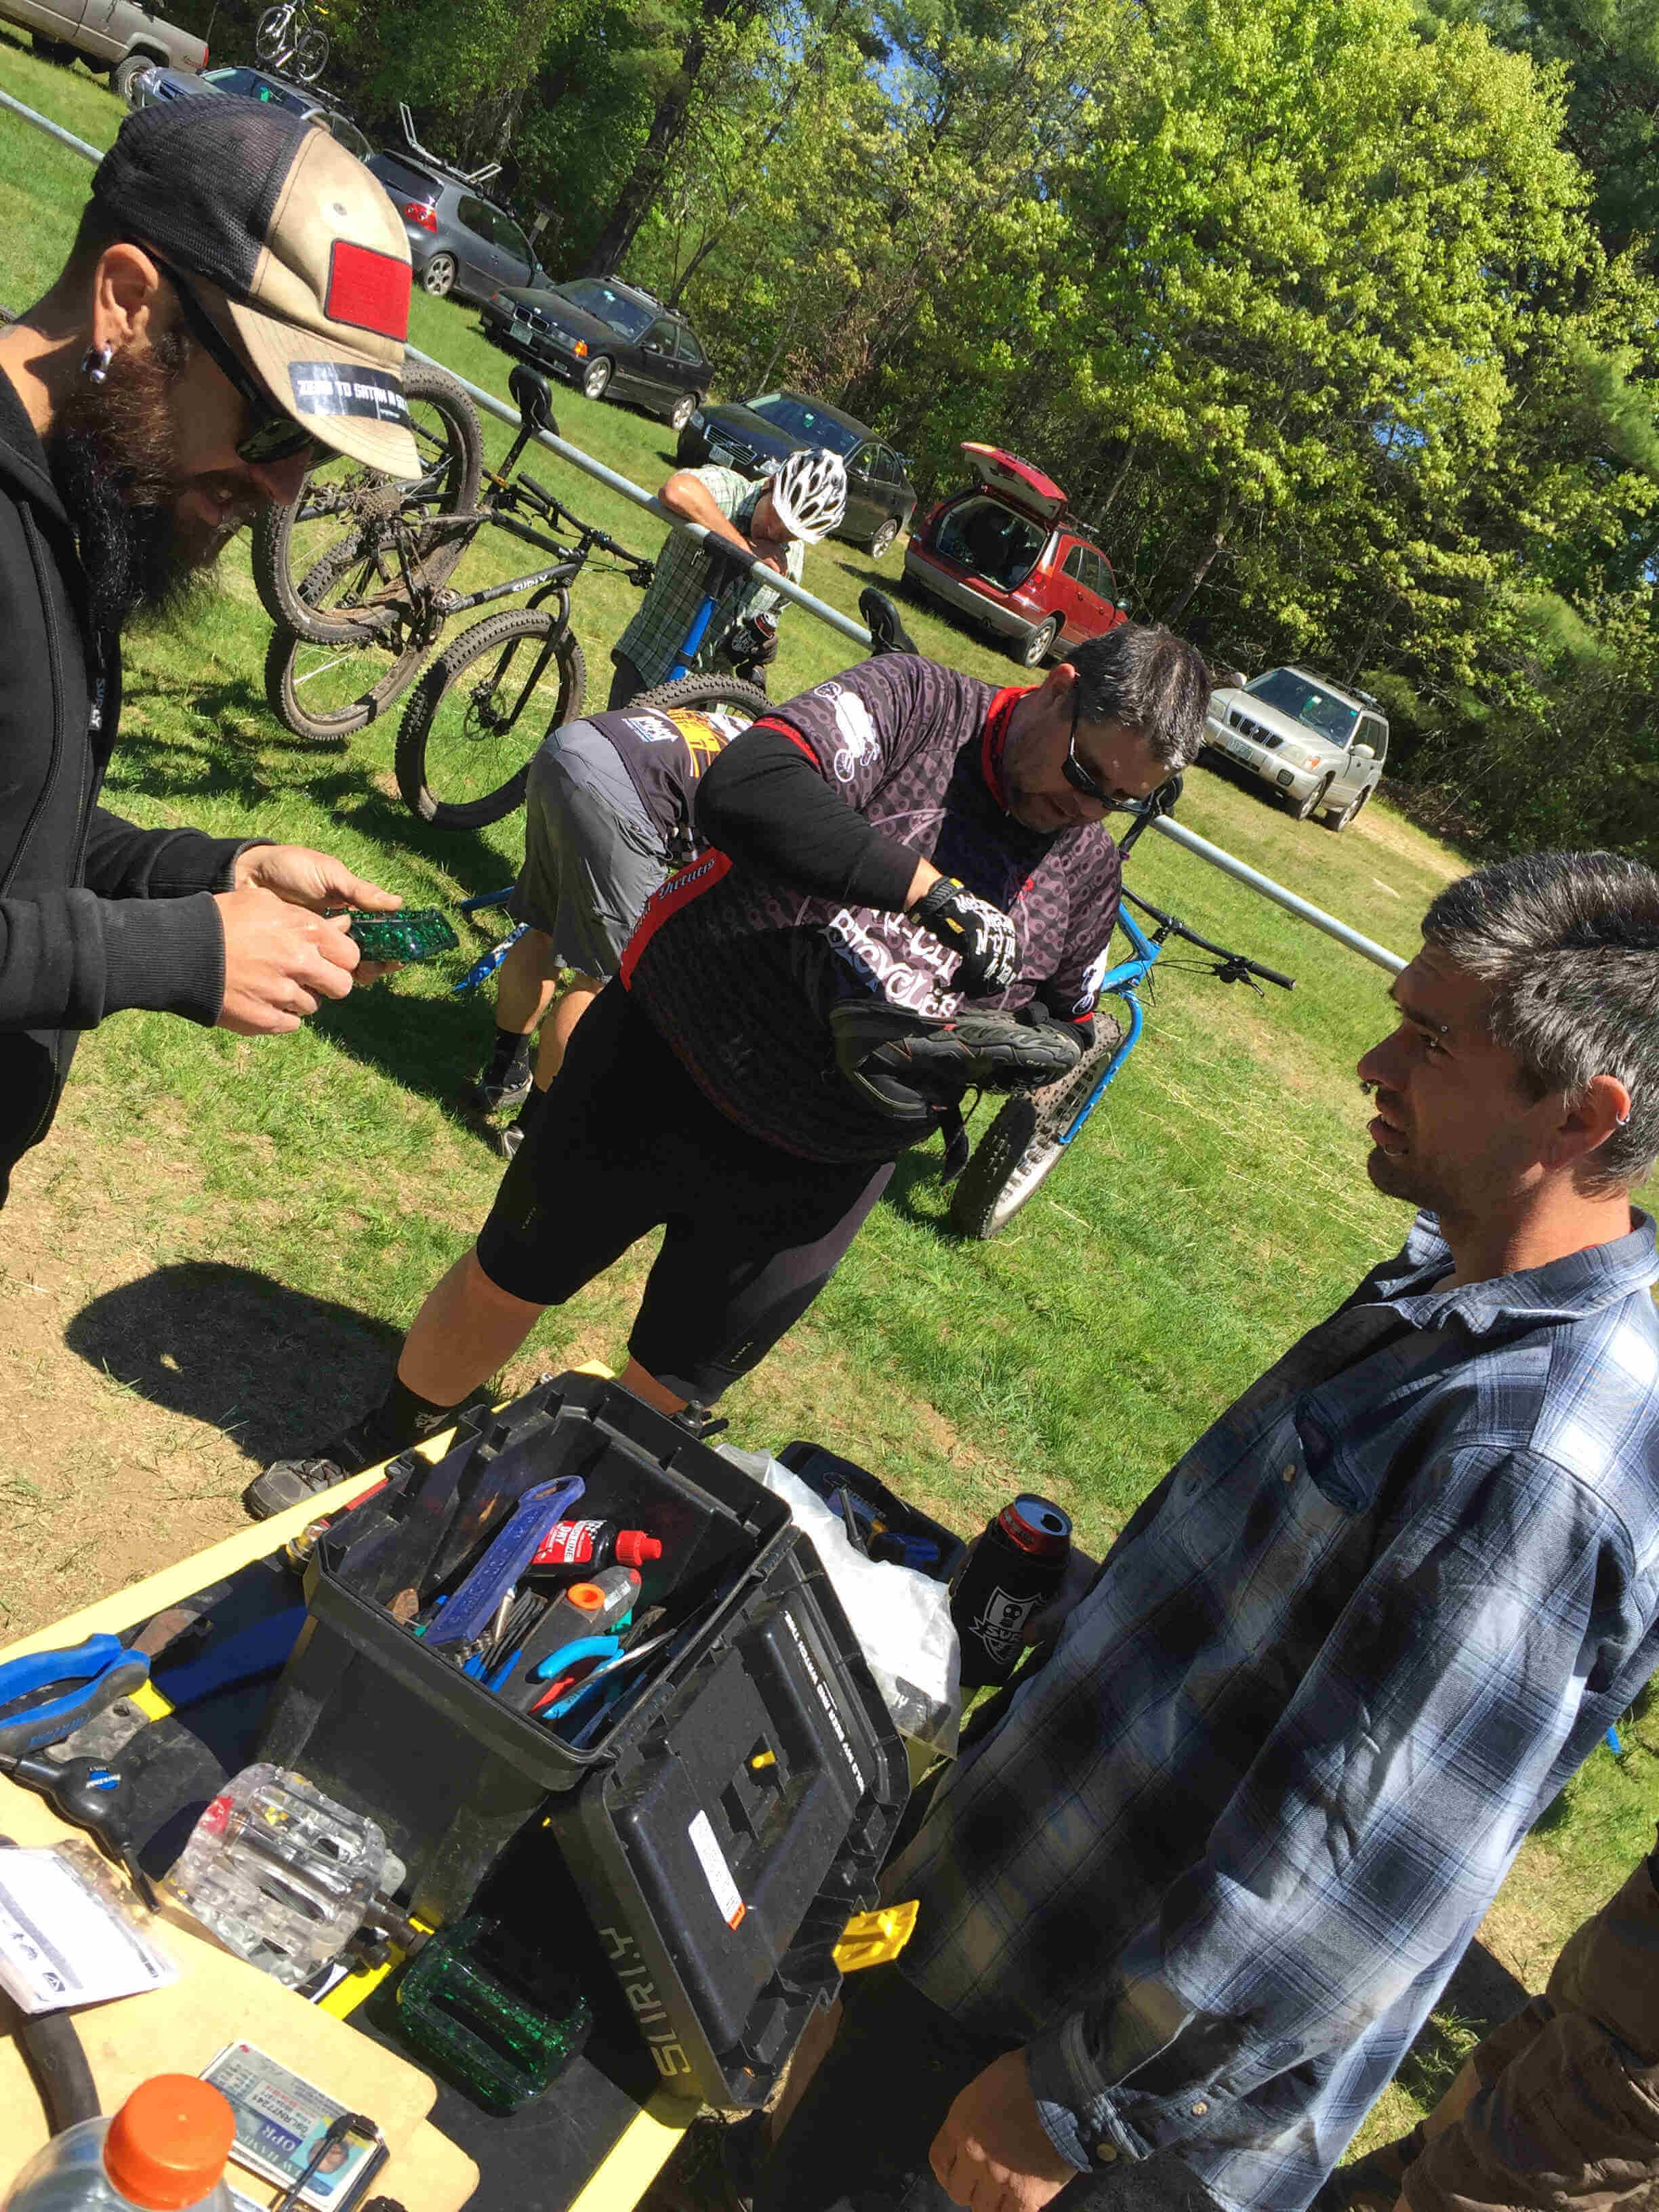 Tilted view of 3 people standing around a table with an open tool box, with cyclists and bikes in the background